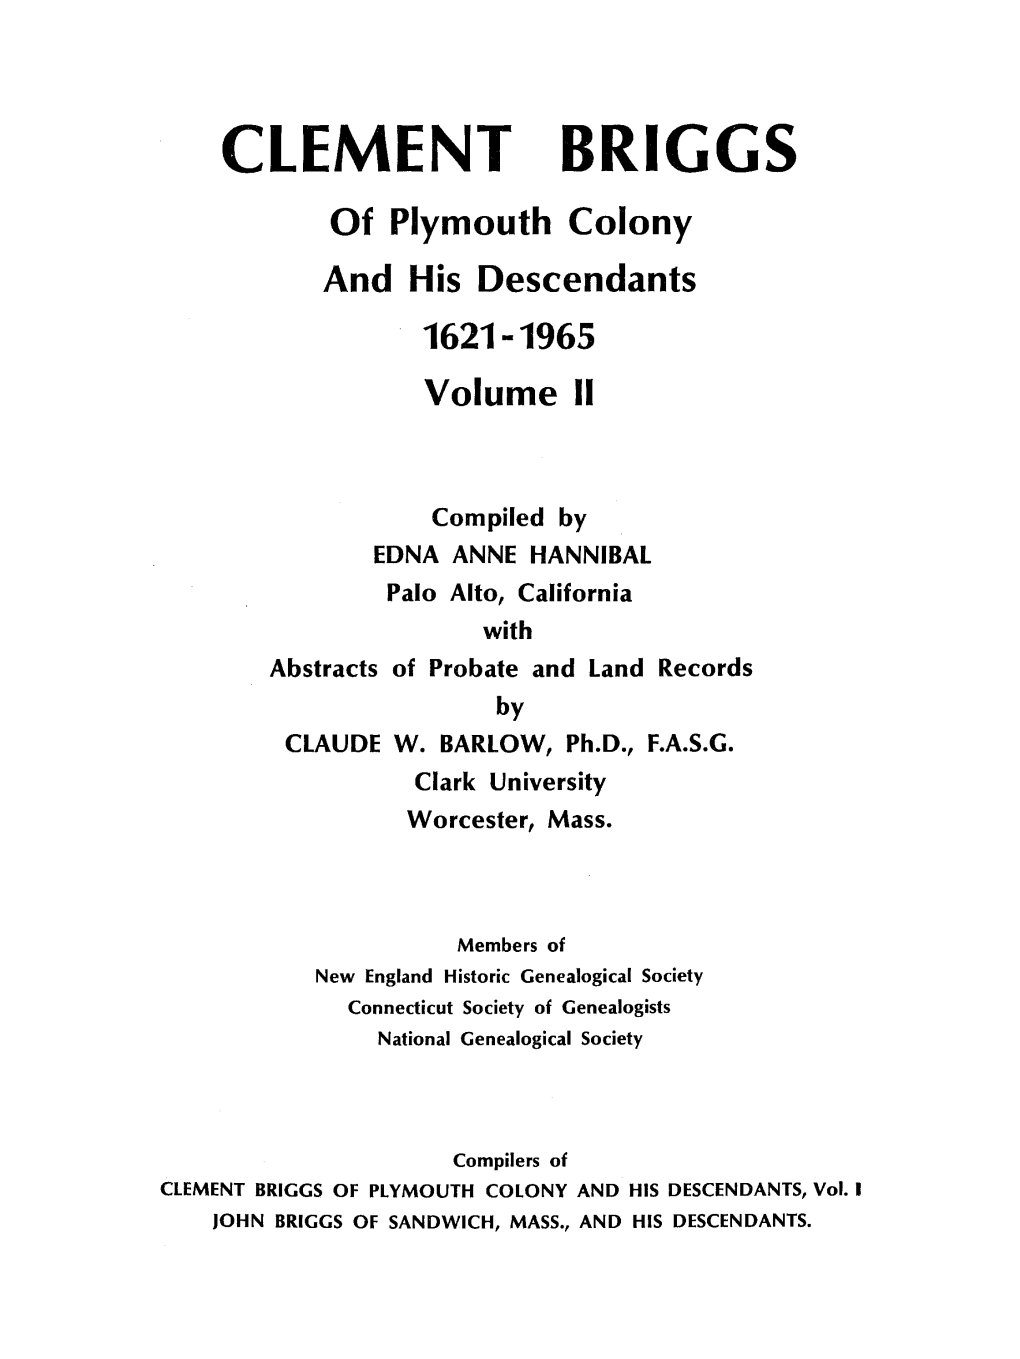 CLEMENT BRIGGS of Plymouth Colony and His Descendants 1621-1965 Volume II